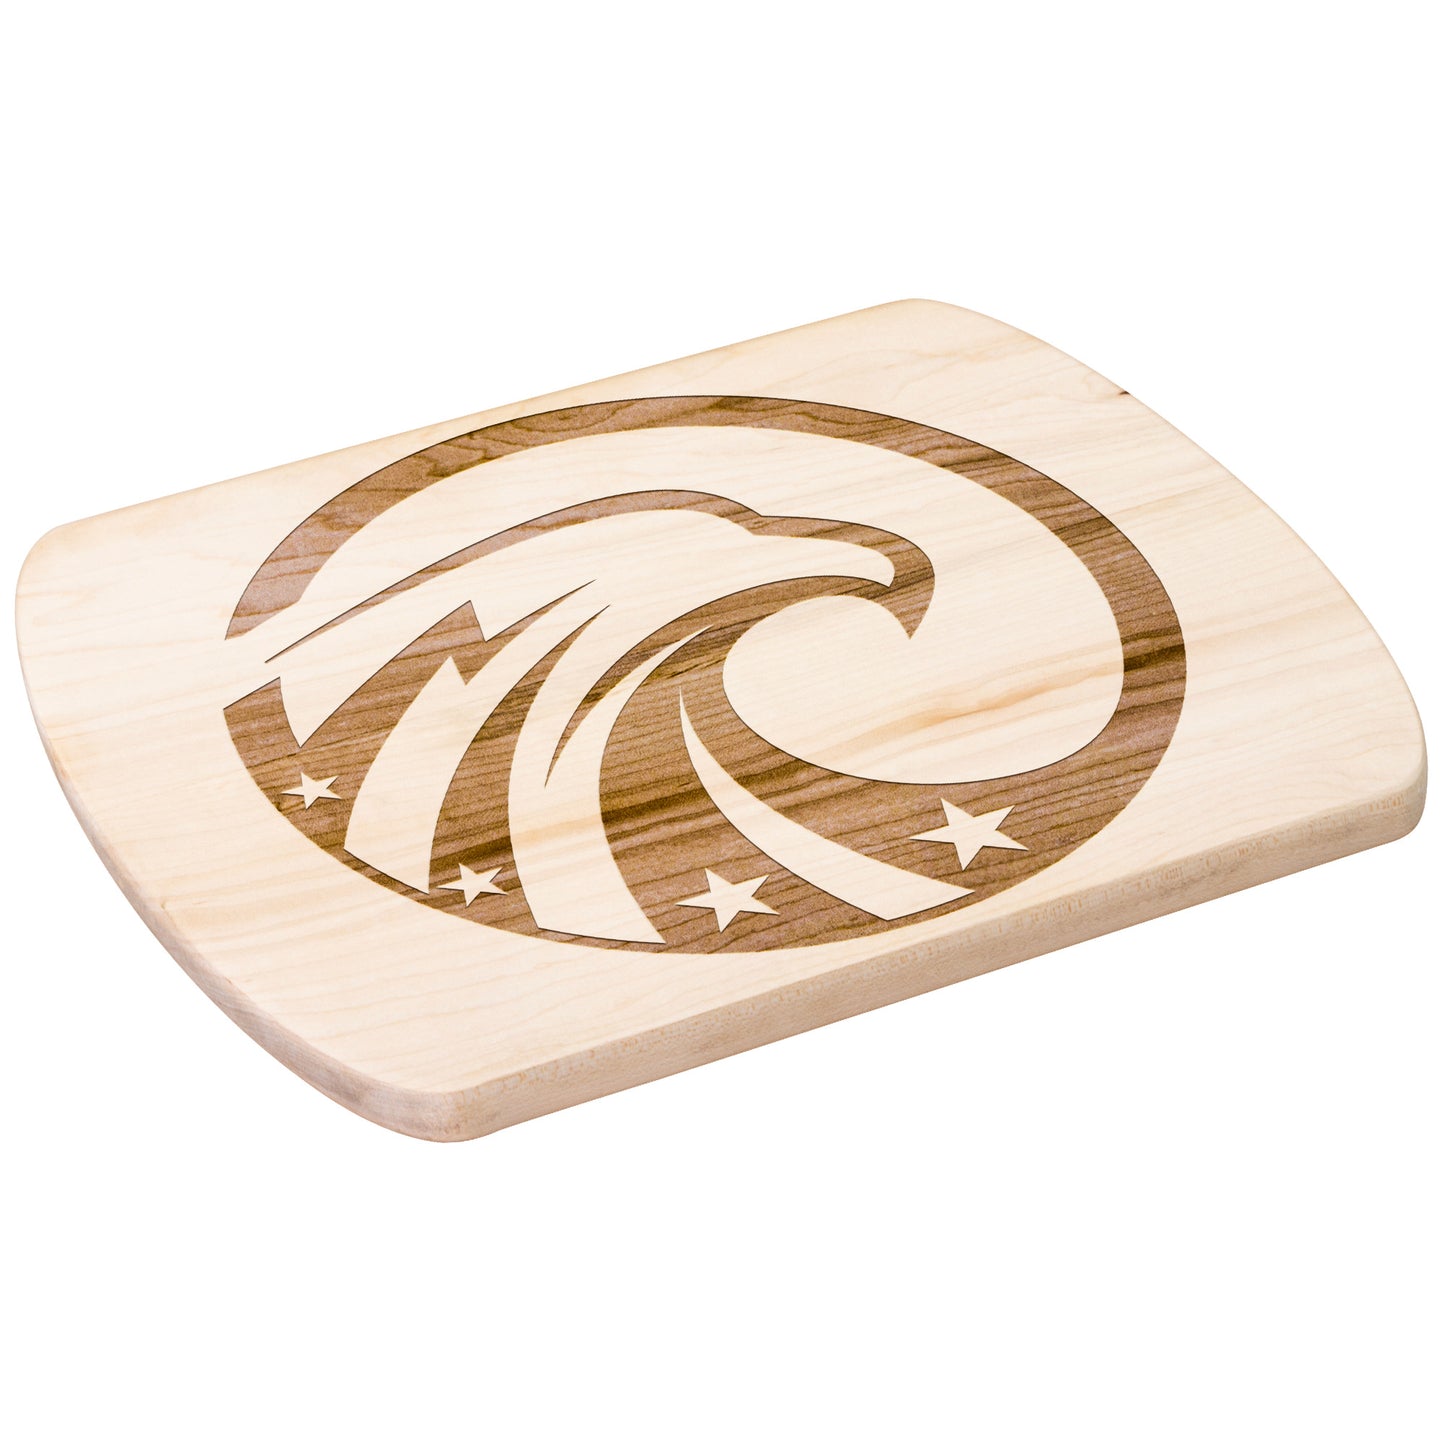 USA Eagle with Stars Hardwood Oval Cutting Boards in Maple or Walnut